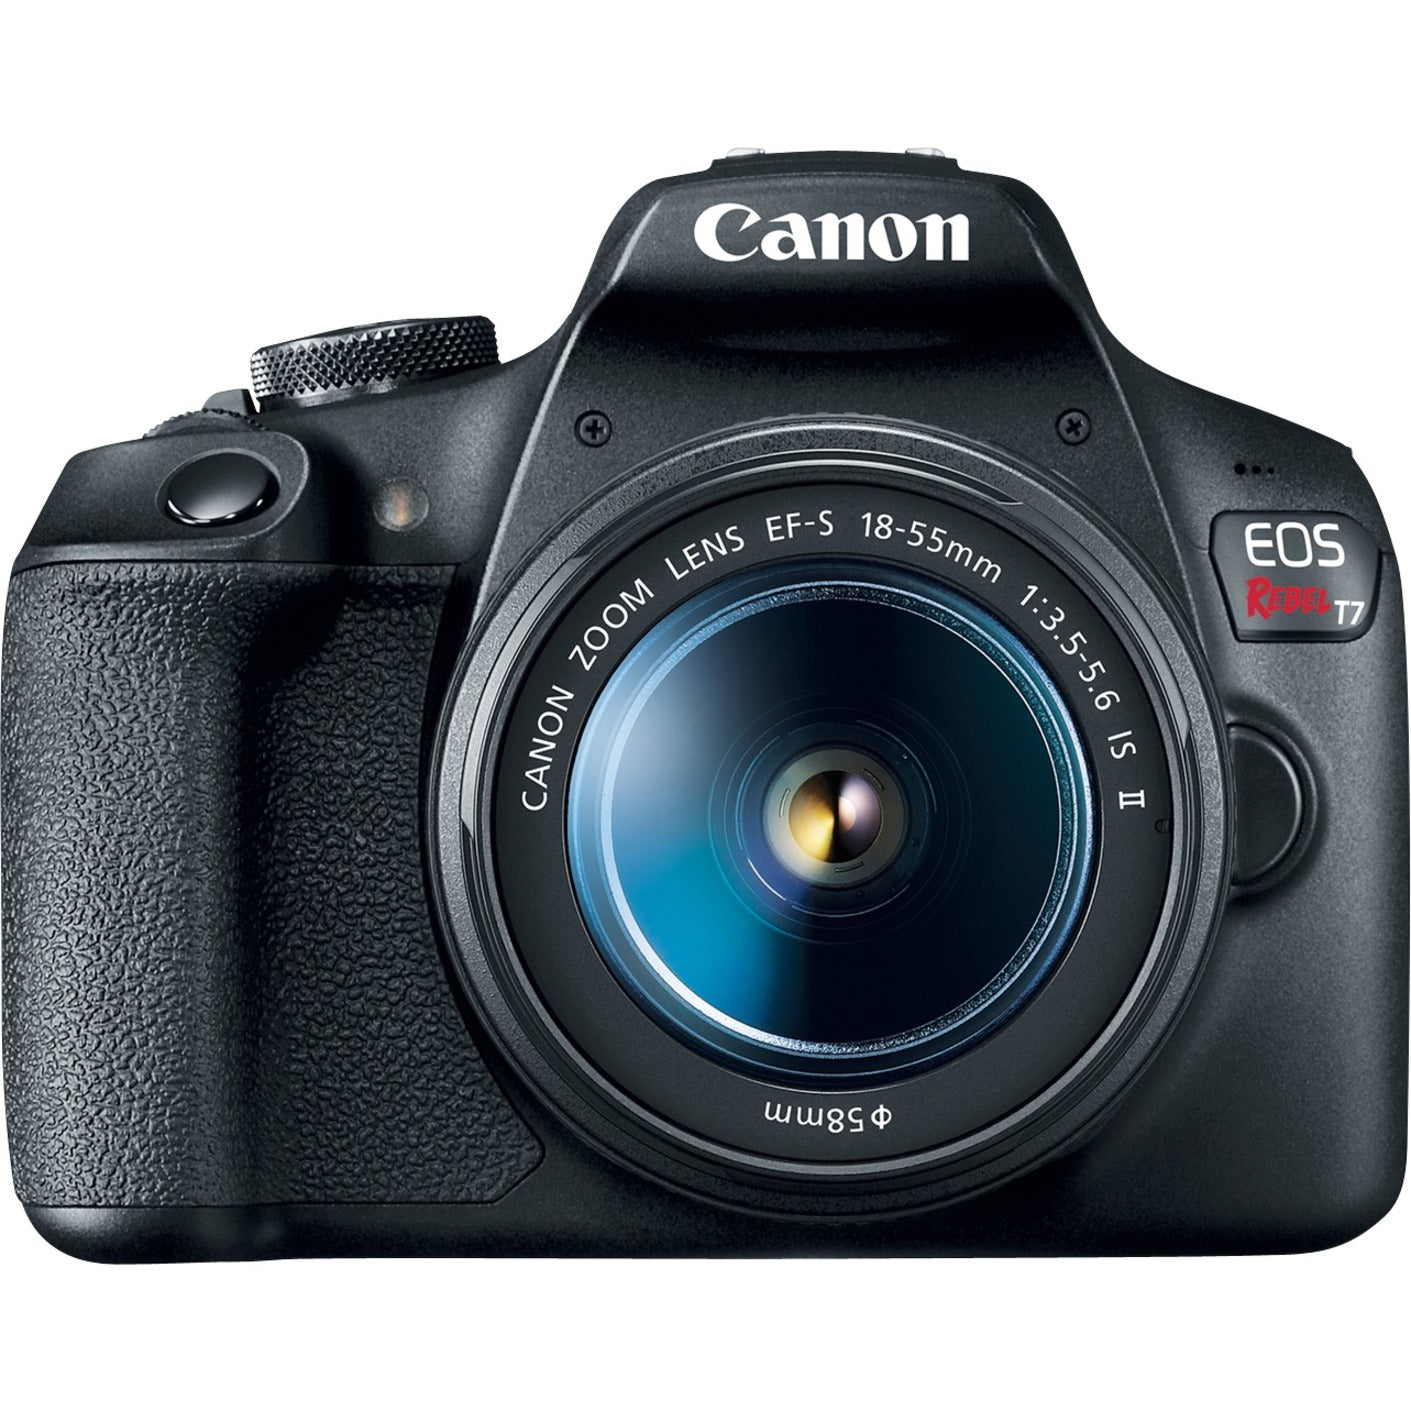 Canon 2727C002 EOS Rebel T7 Digital SLR Camera with Lens, 24.1 Megapixel, 3" LCD, 1920 x 1080 Video